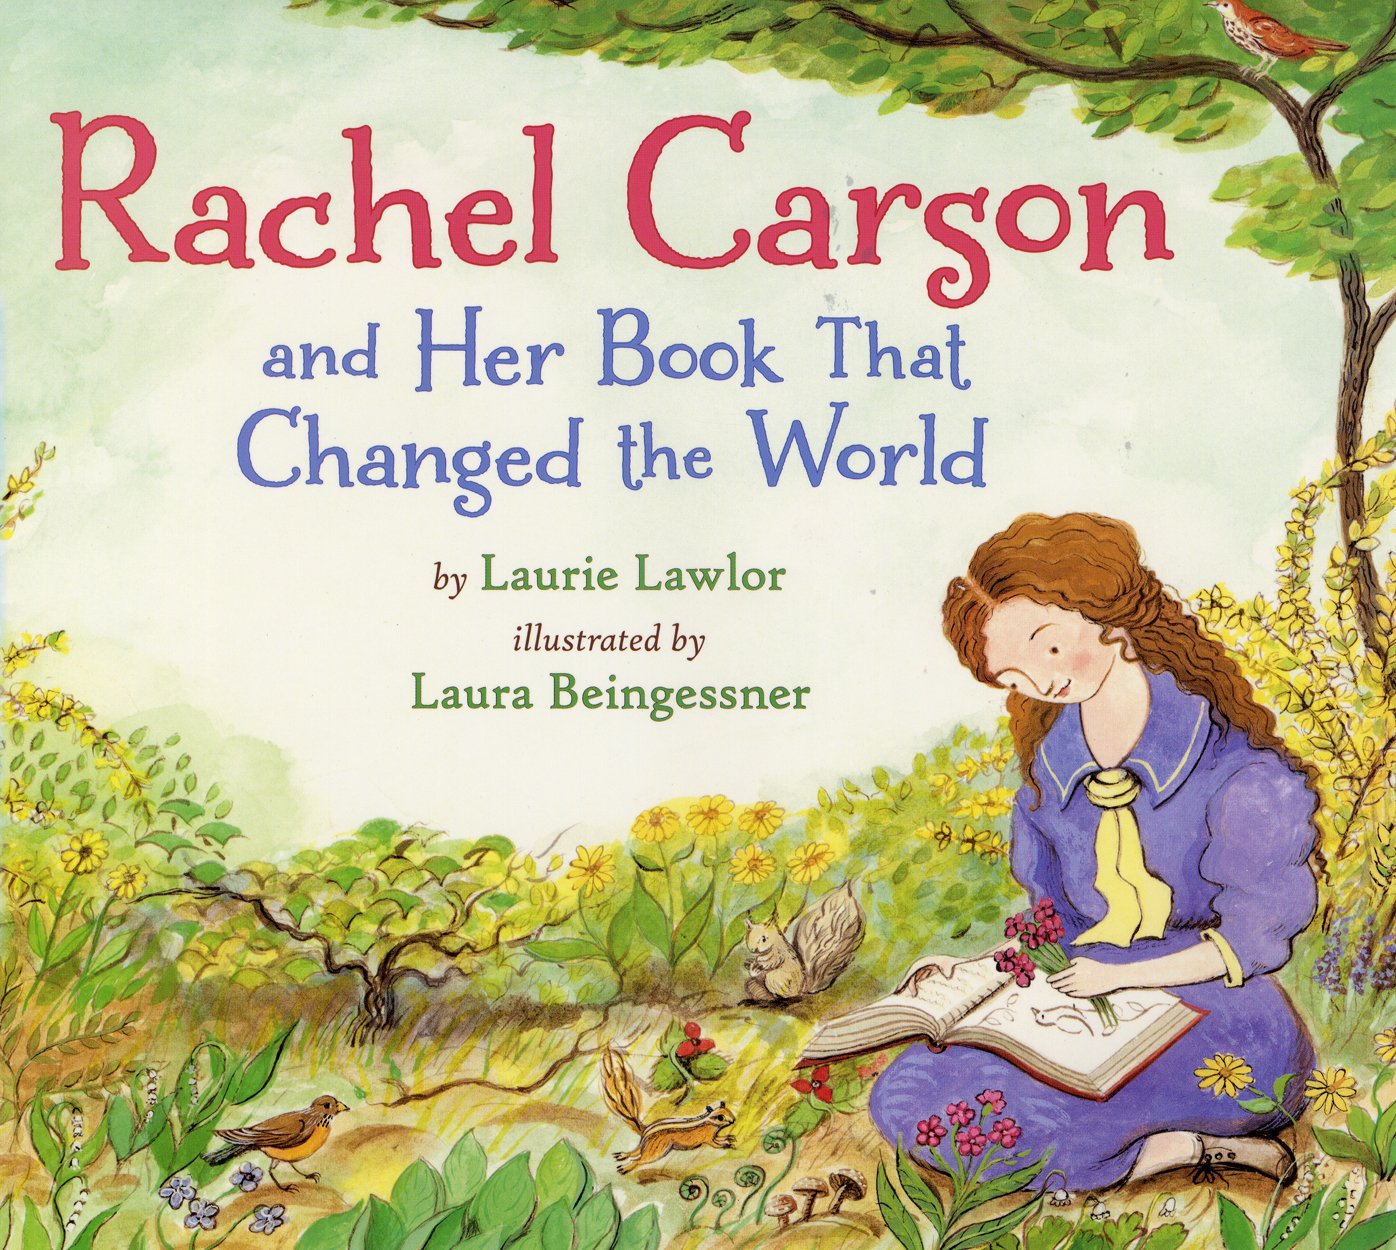 Rachel Carson and her Book that Changed the World